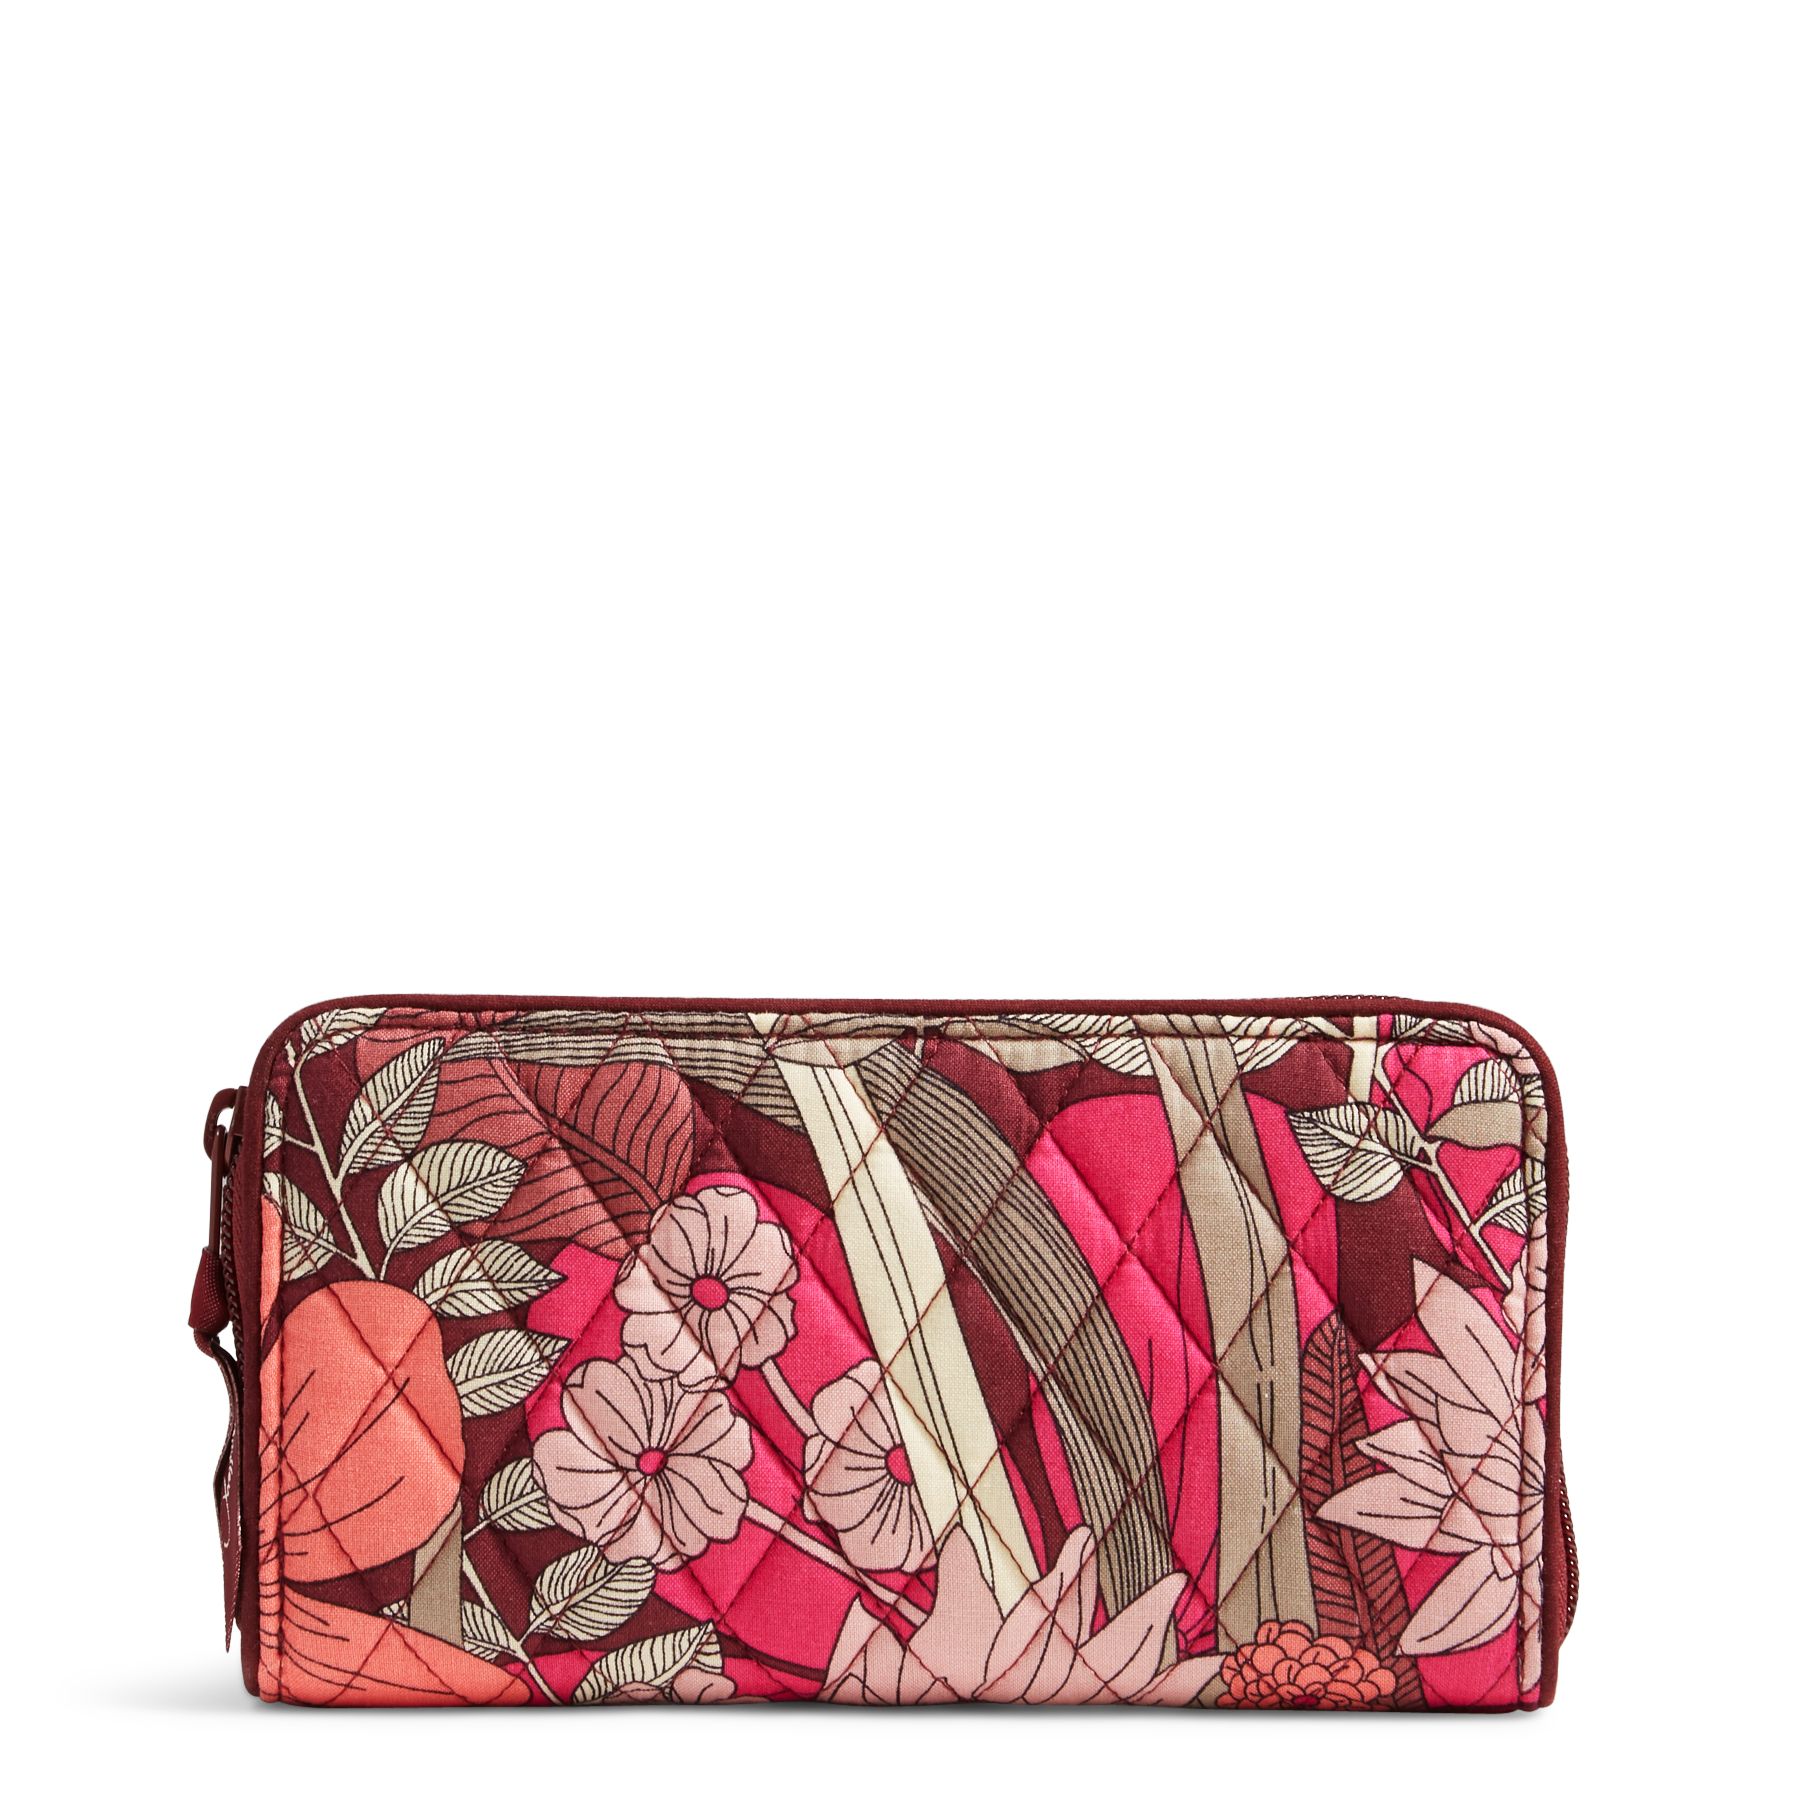 Vera Bradley Coupon Code: Gifts for Women